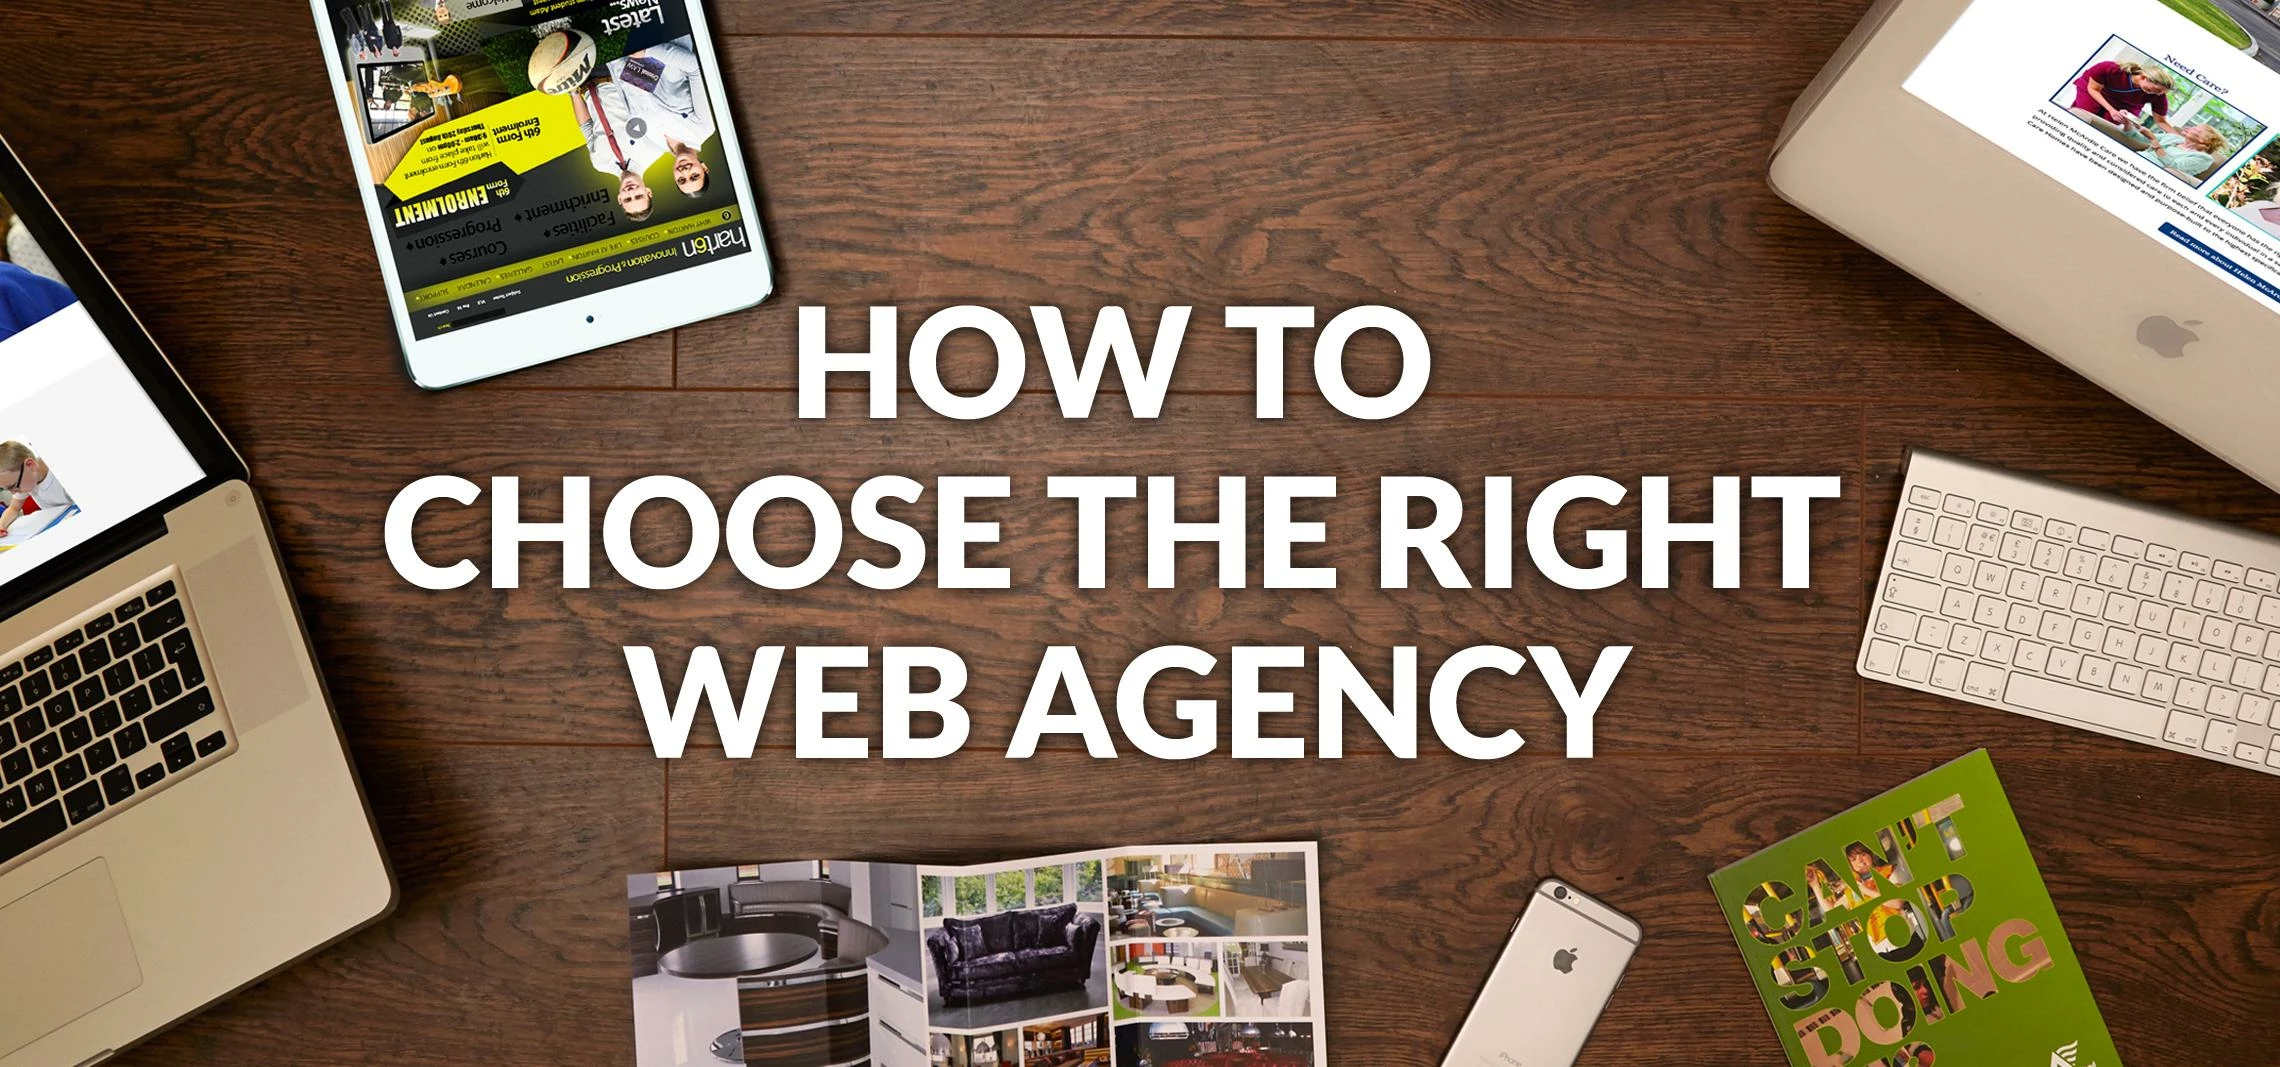 How to choose the right web agency by Urban River